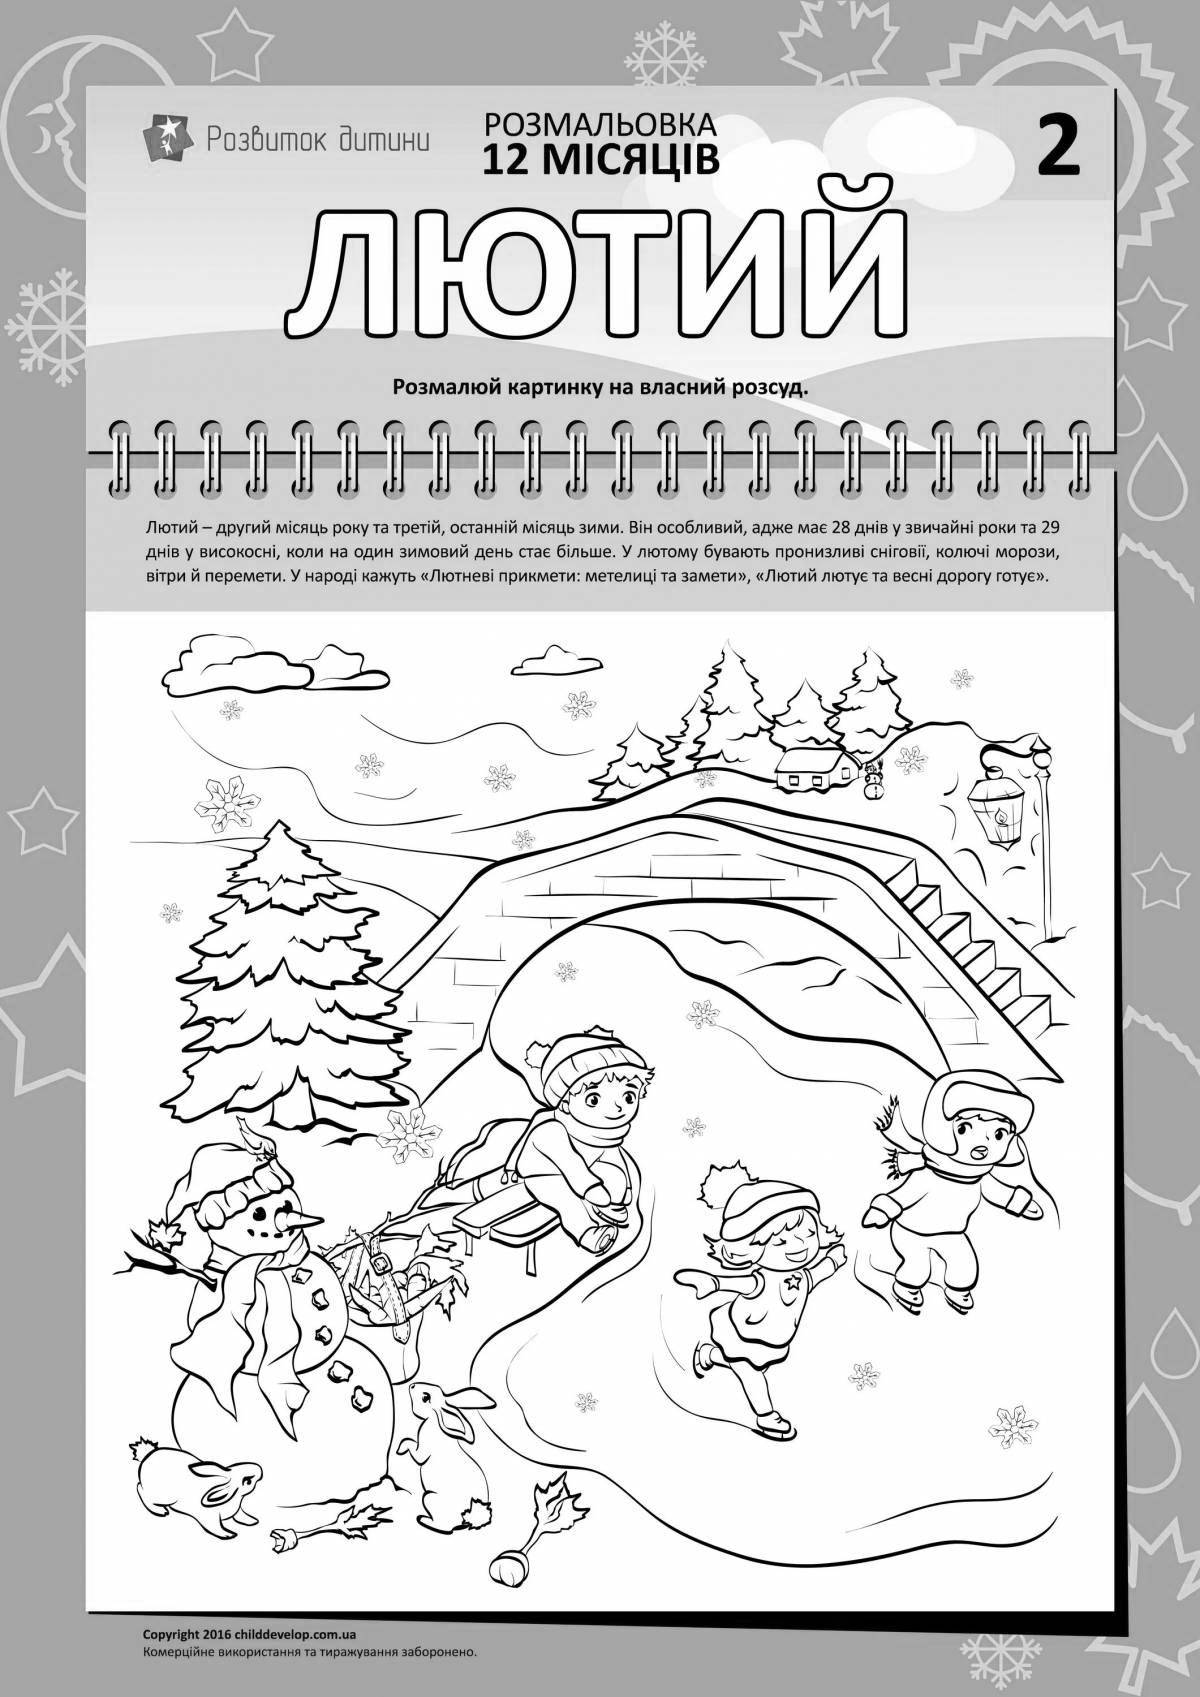 January shining coloring page